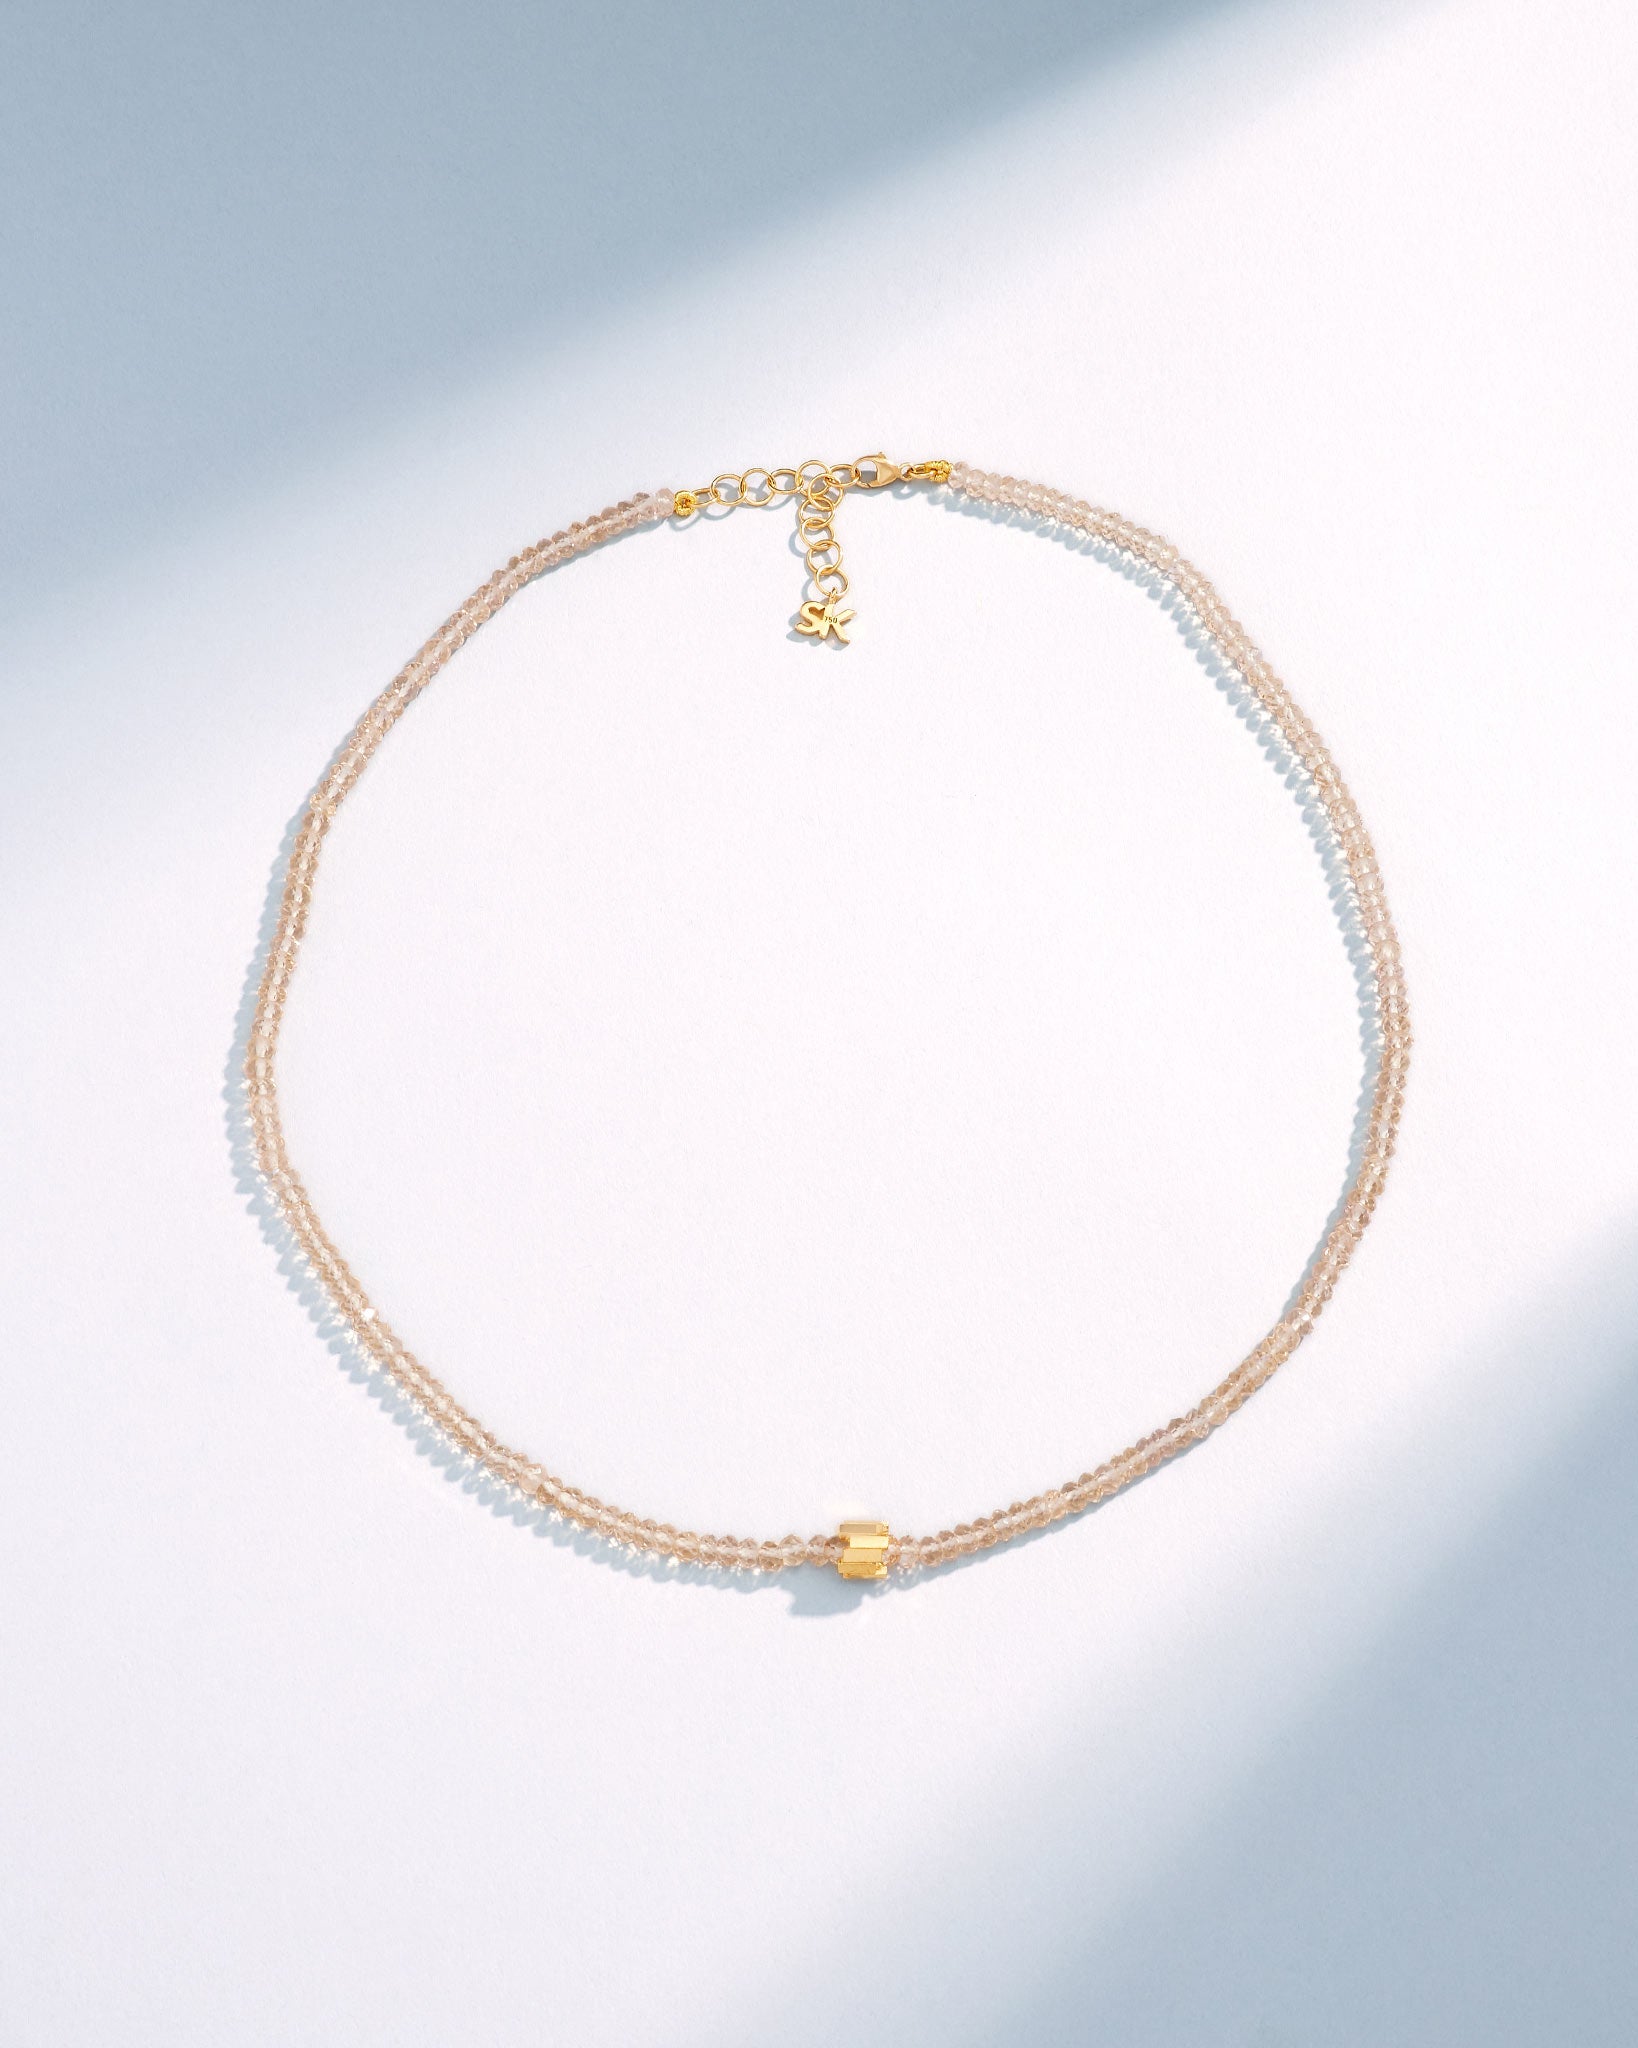 Suzanne Kalan Infinite Beaded Champagne Topaz & Mini Golden Rondelle Necklace in 18k yellow gold